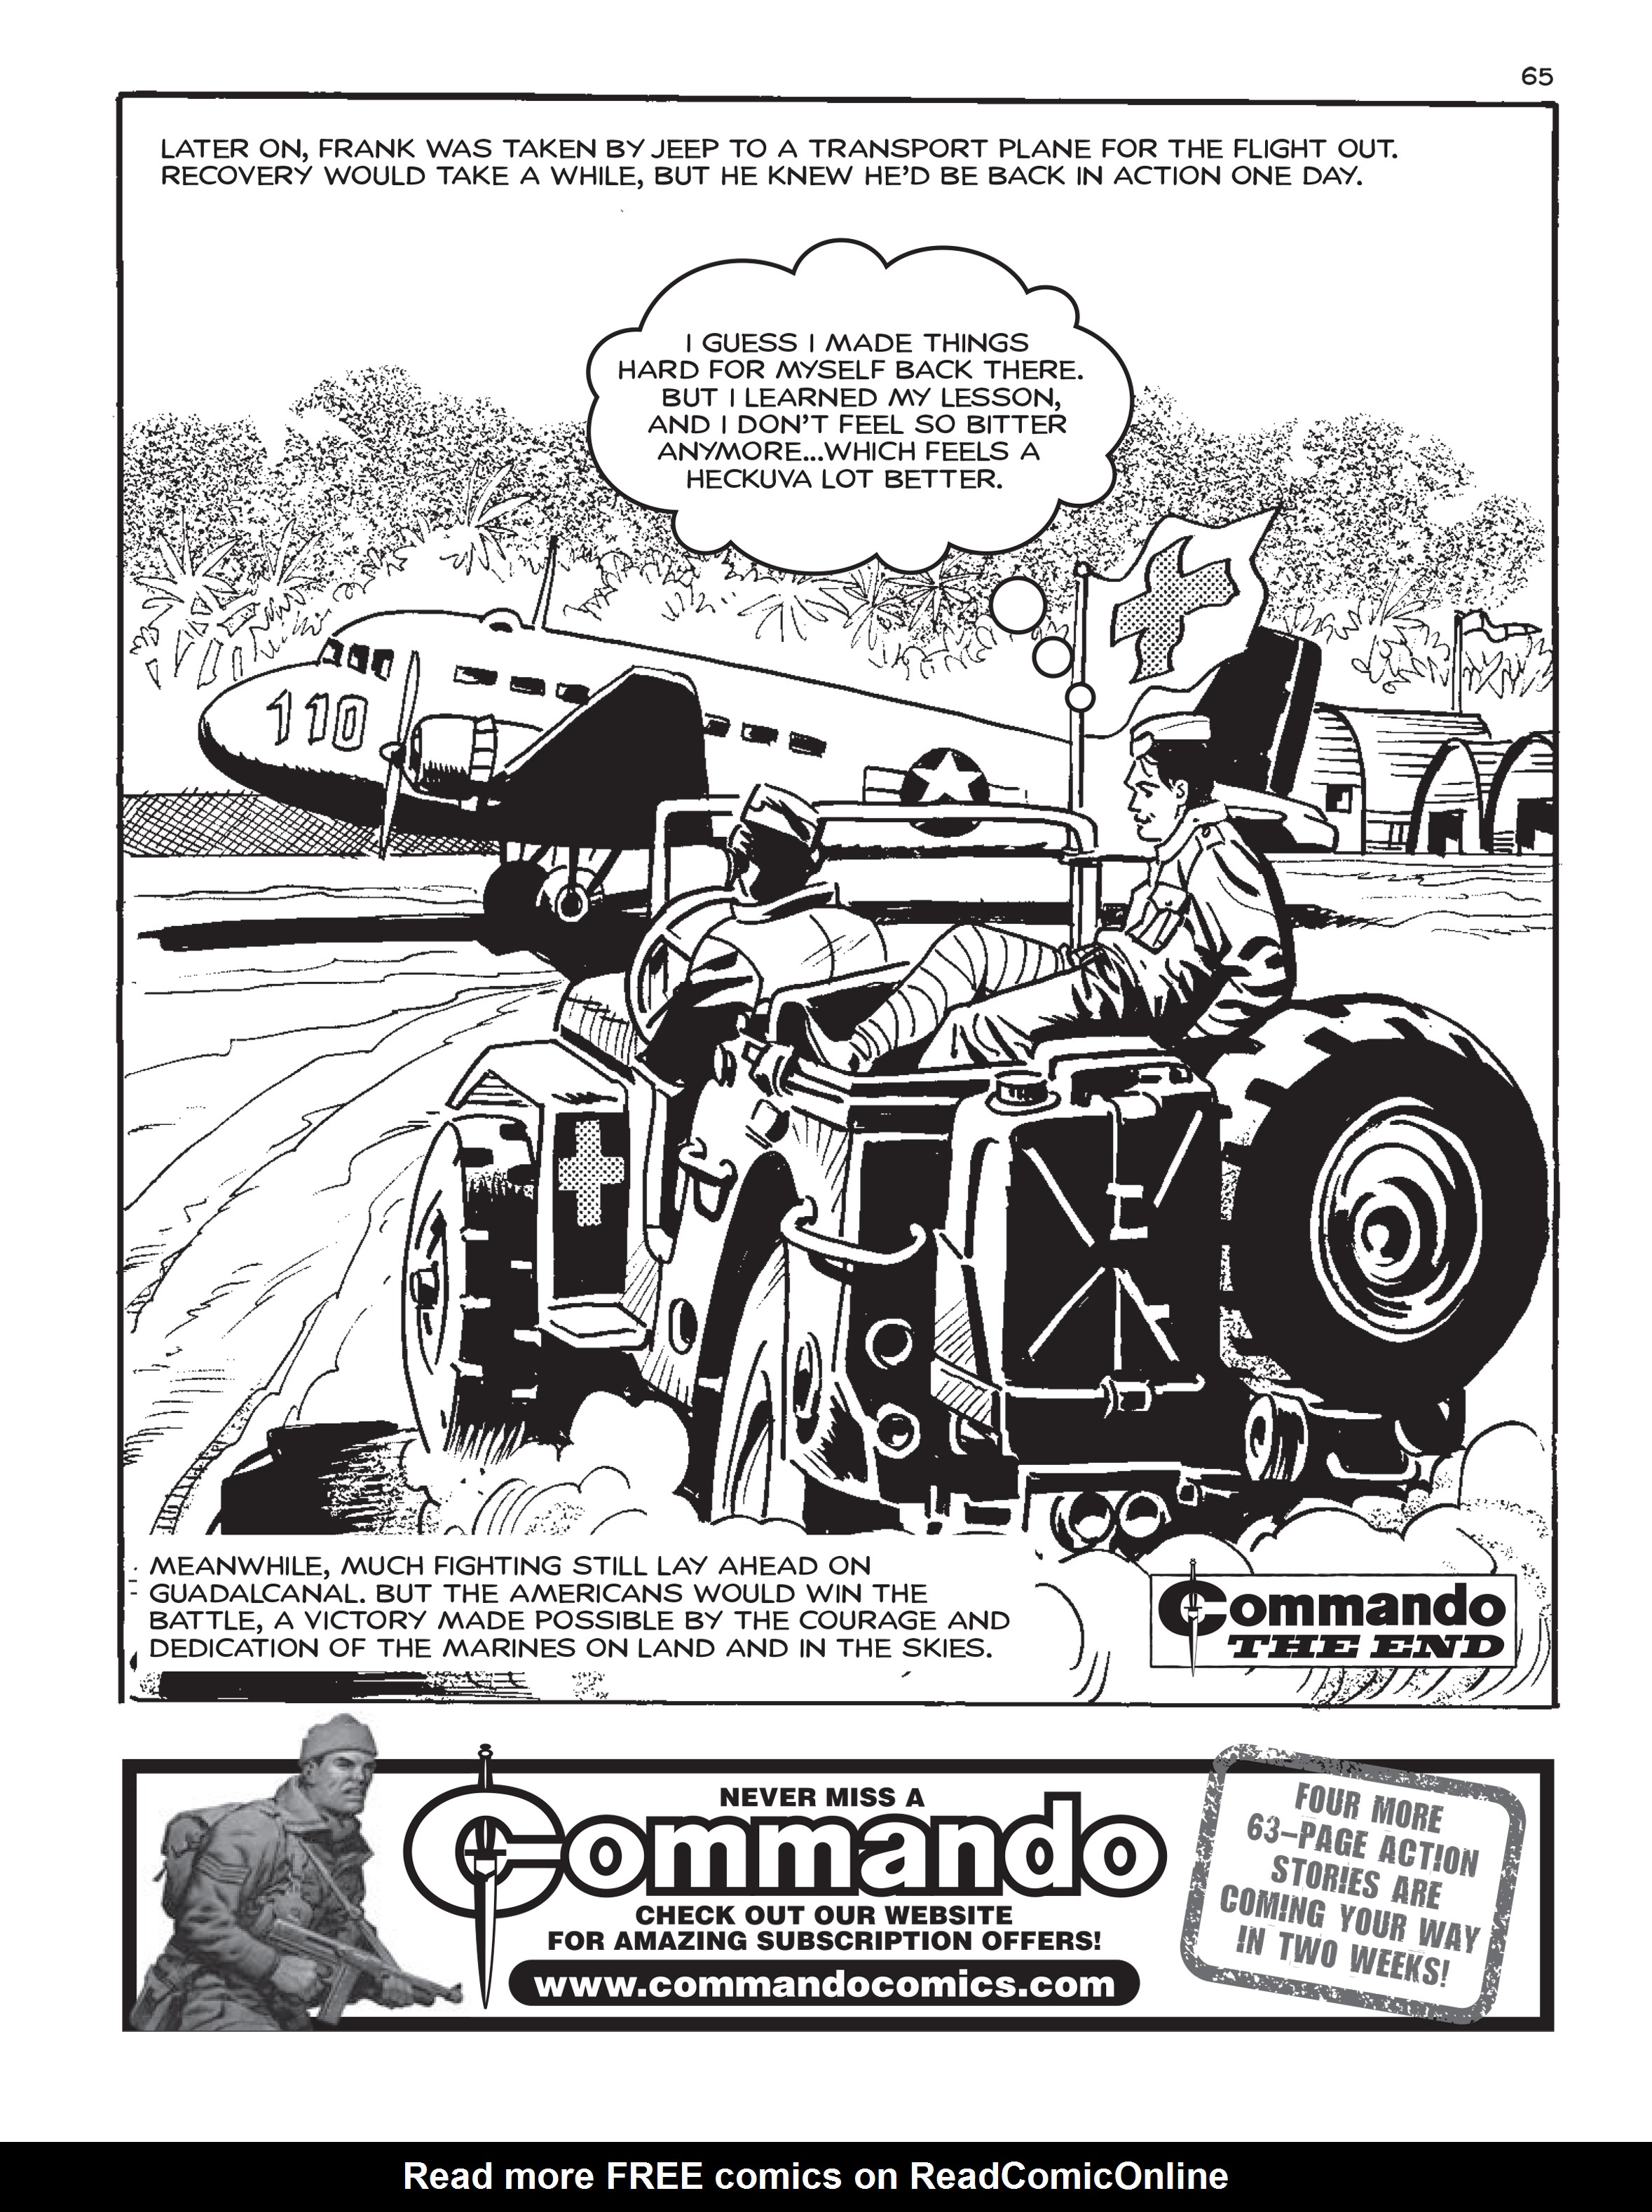 Read online Commando: For Action and Adventure comic -  Issue #5209 - 64